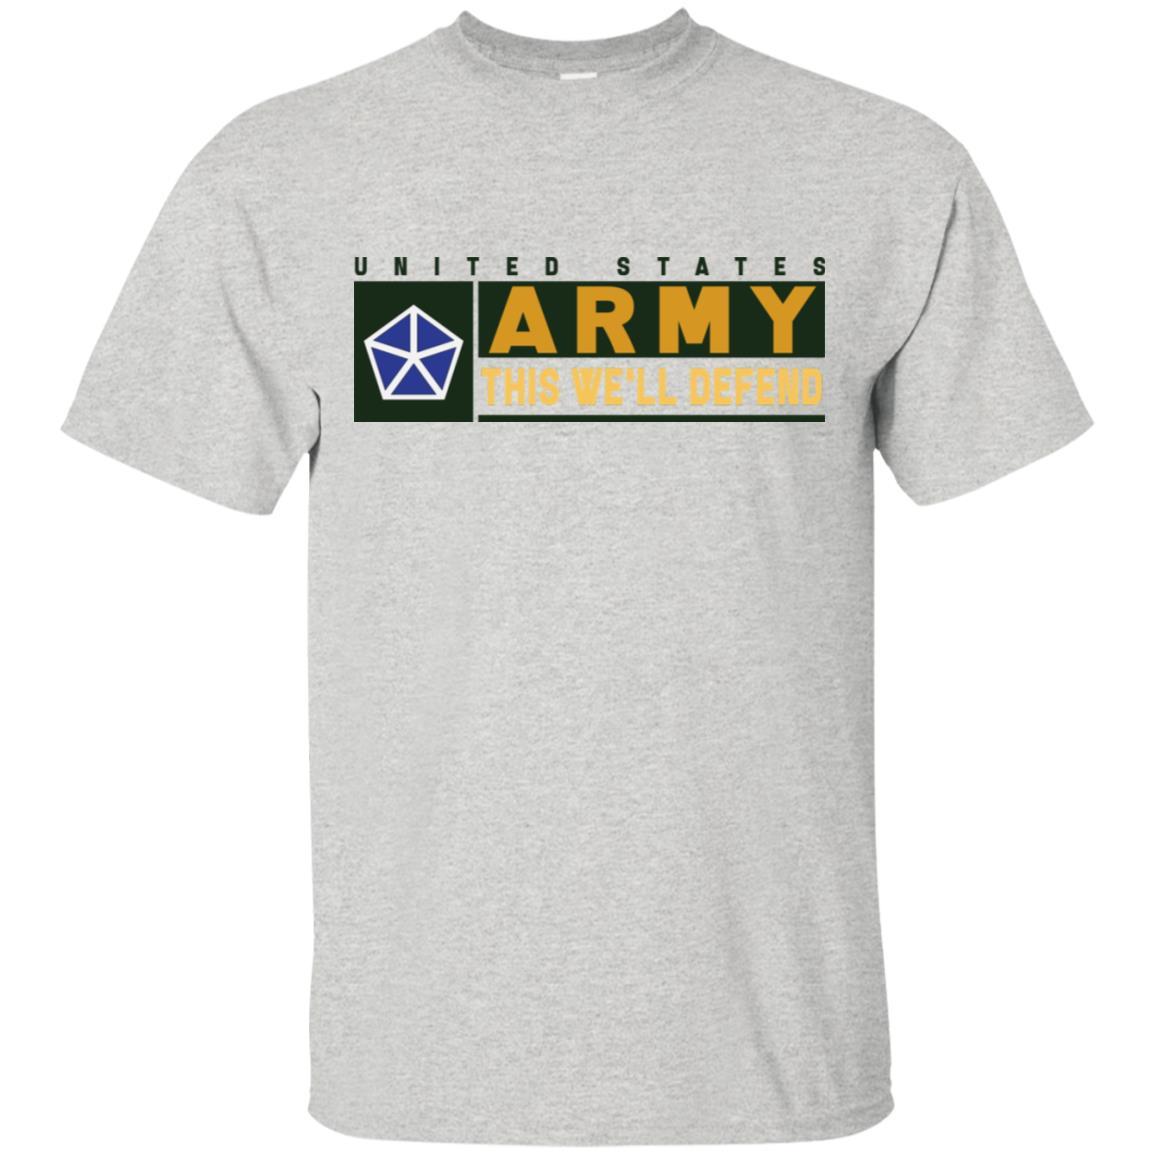 US Army 5TH CORPS- This We'll Defend T-Shirt On Front For Men-TShirt-Army-Veterans Nation